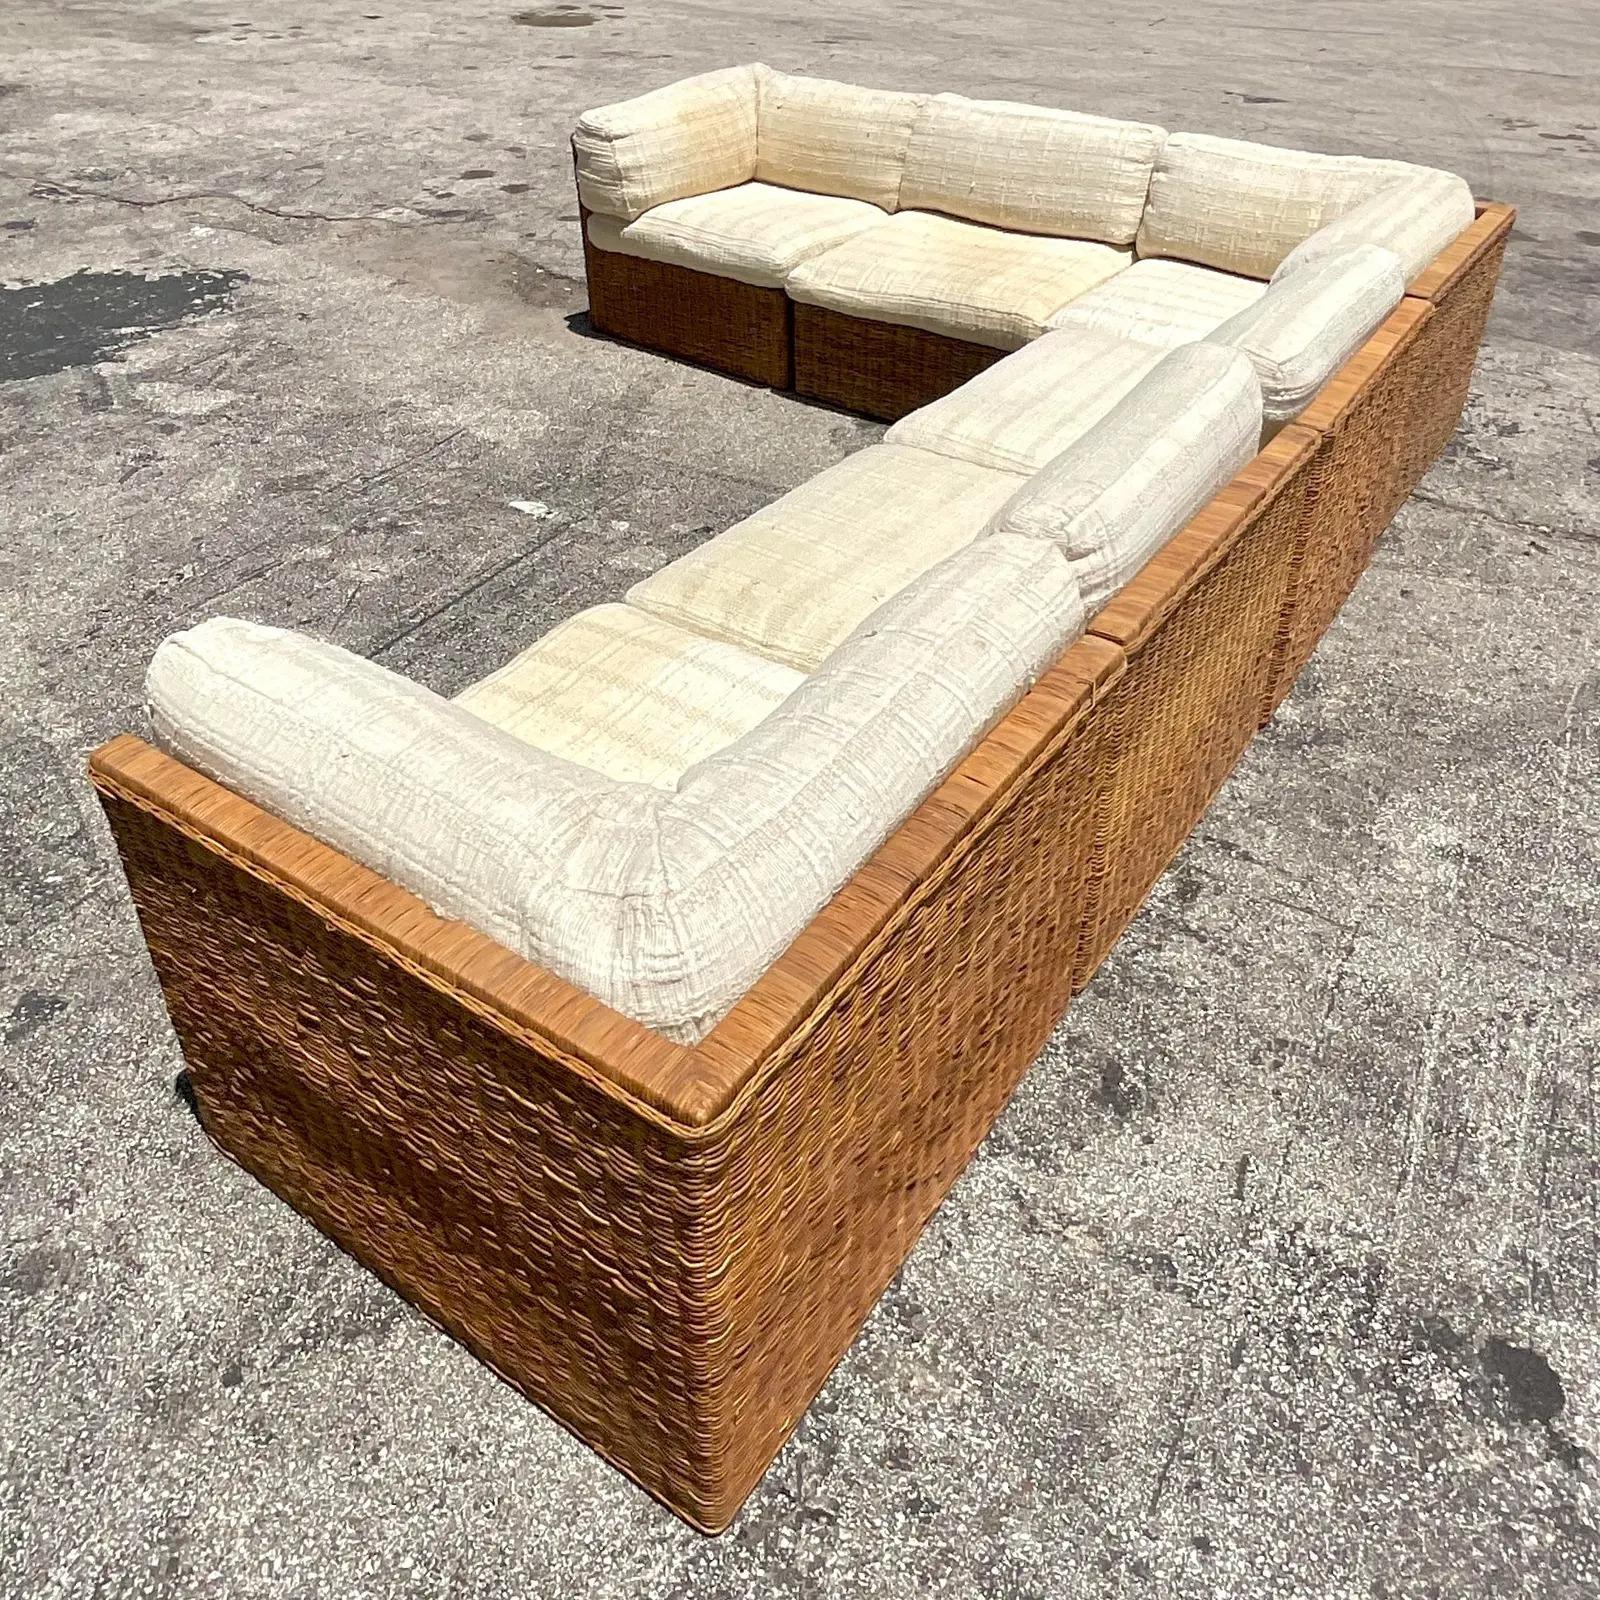 An exceptional vintage Boho sectional sofa. A chic woven rattan with six individual sections. Rearrange the sections to suit your project needs. A heavy cotton boucle with a textured design. Made by the Comfort Designs group and tagged on the